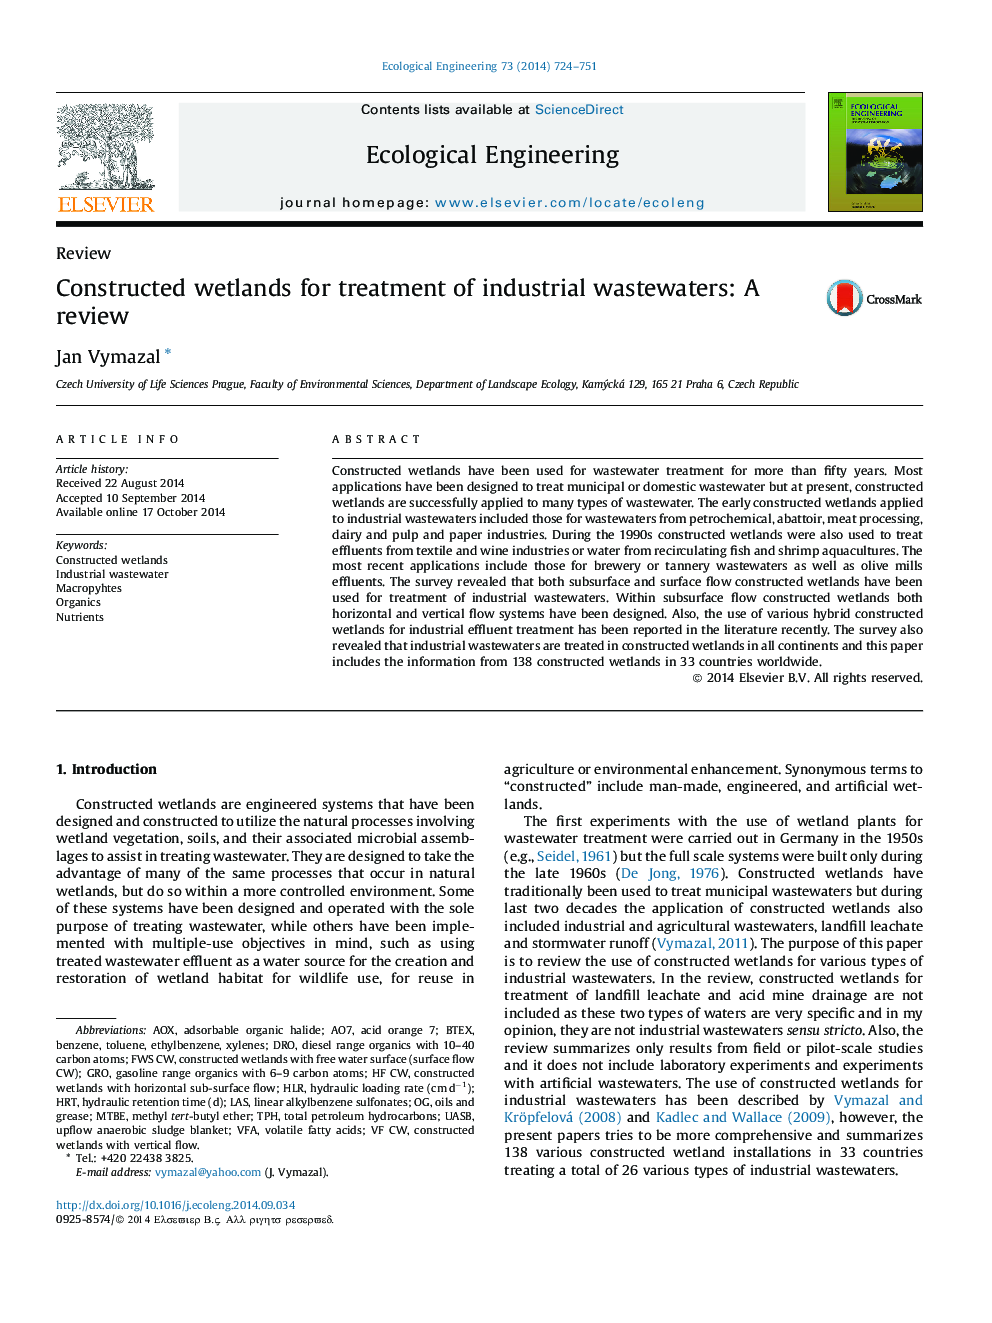 ReviewConstructed wetlands for treatment of industrial wastewaters: A review